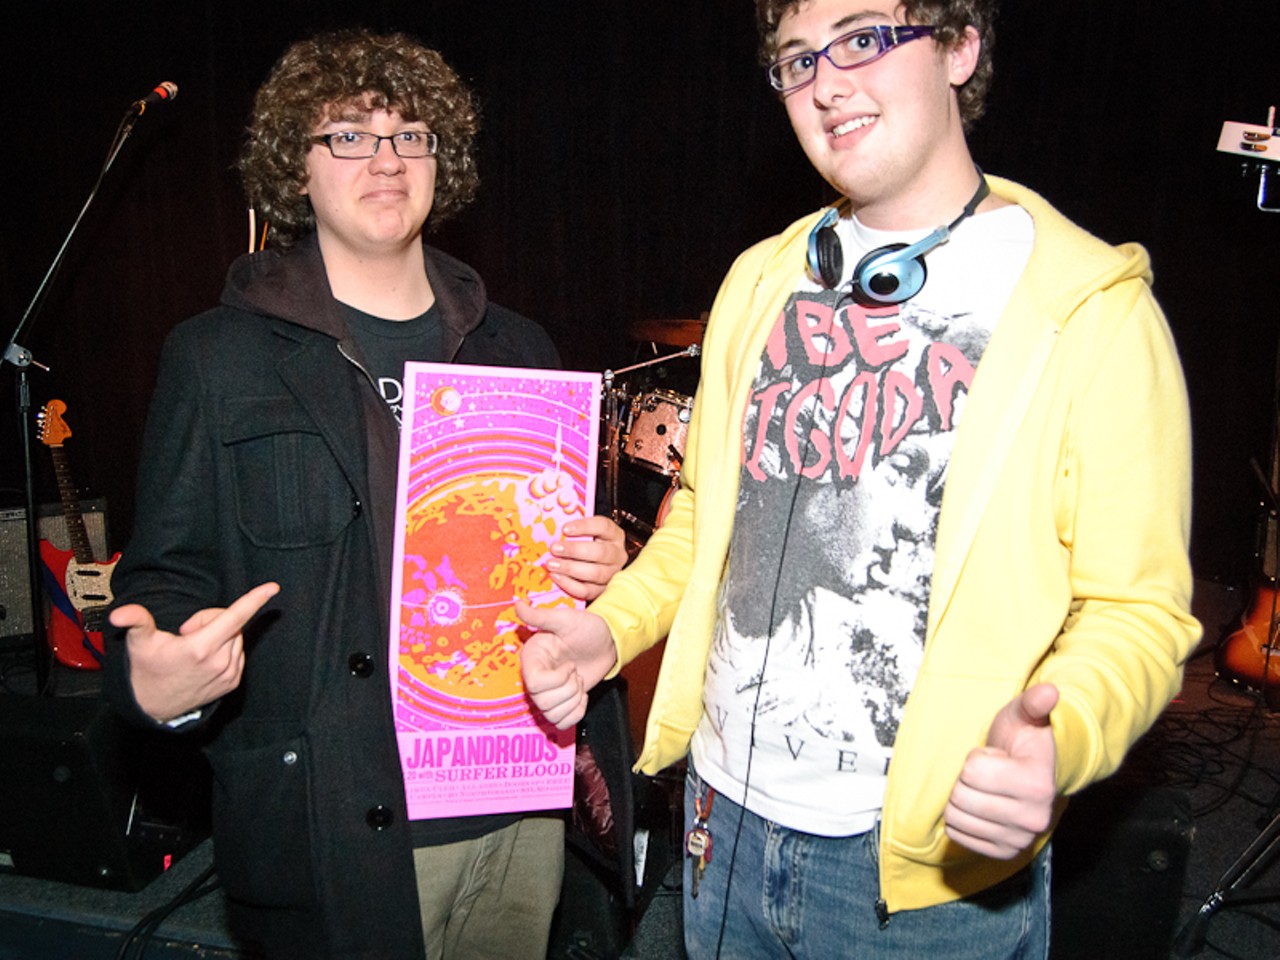 Big fans of both bands, Sam Baiamonte and Anthony Engelhardt show off their Japandroids show poster.